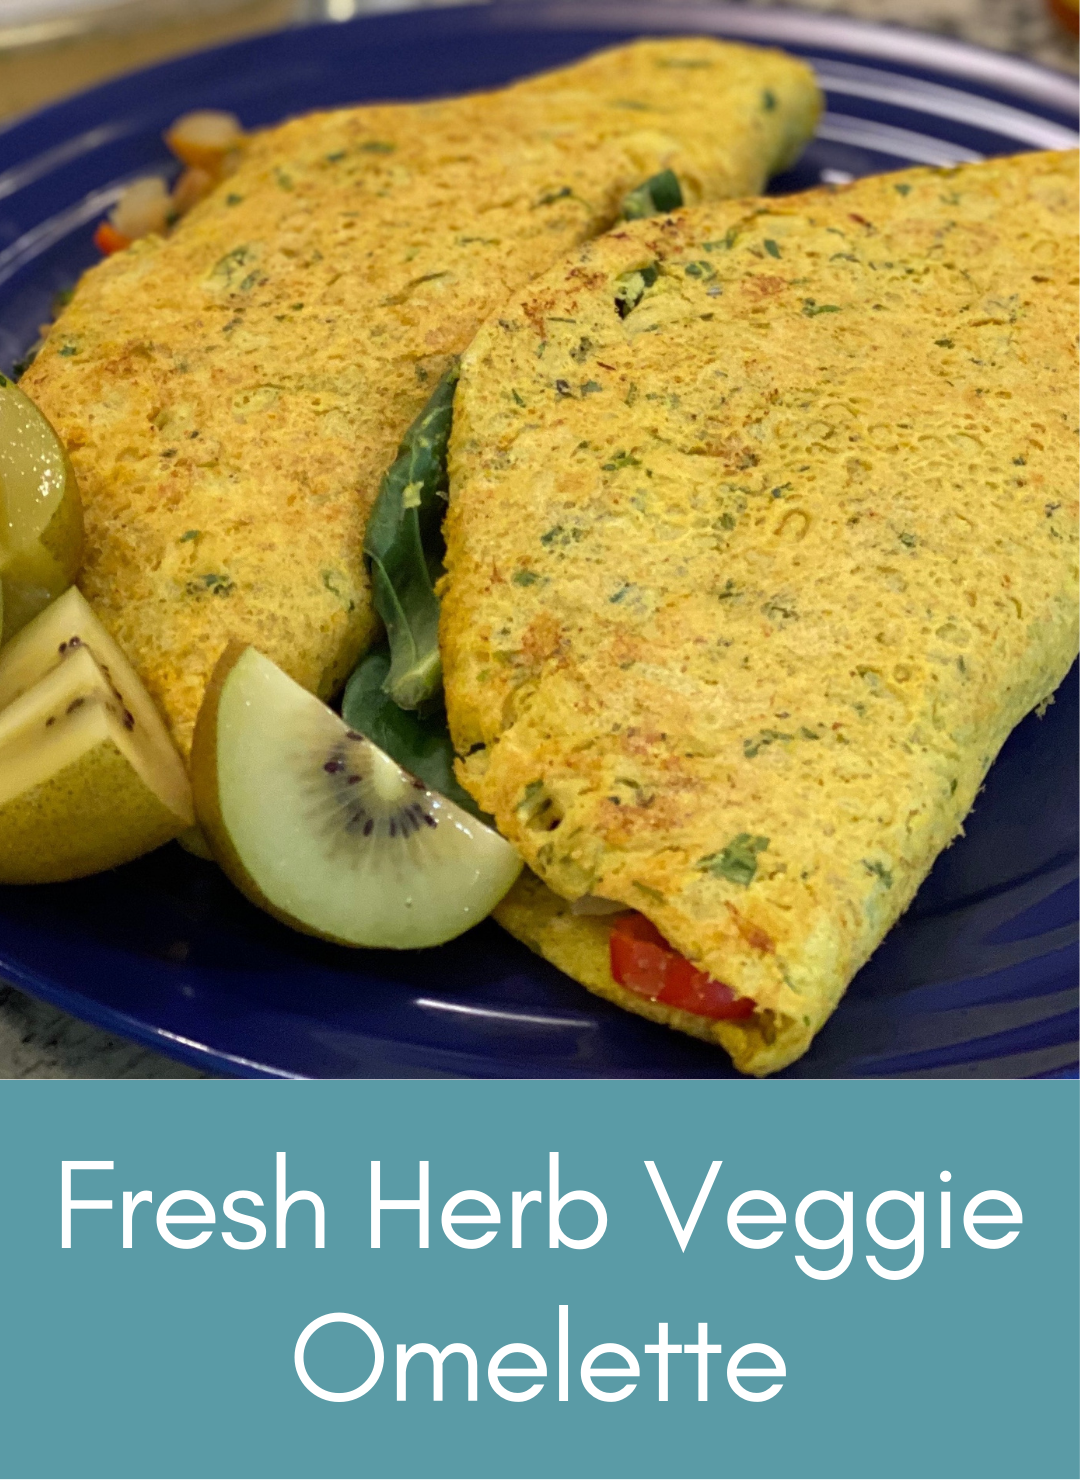 Whole Food Plant Based Fresh Herb Veggie Omelette Picture with link to recipe